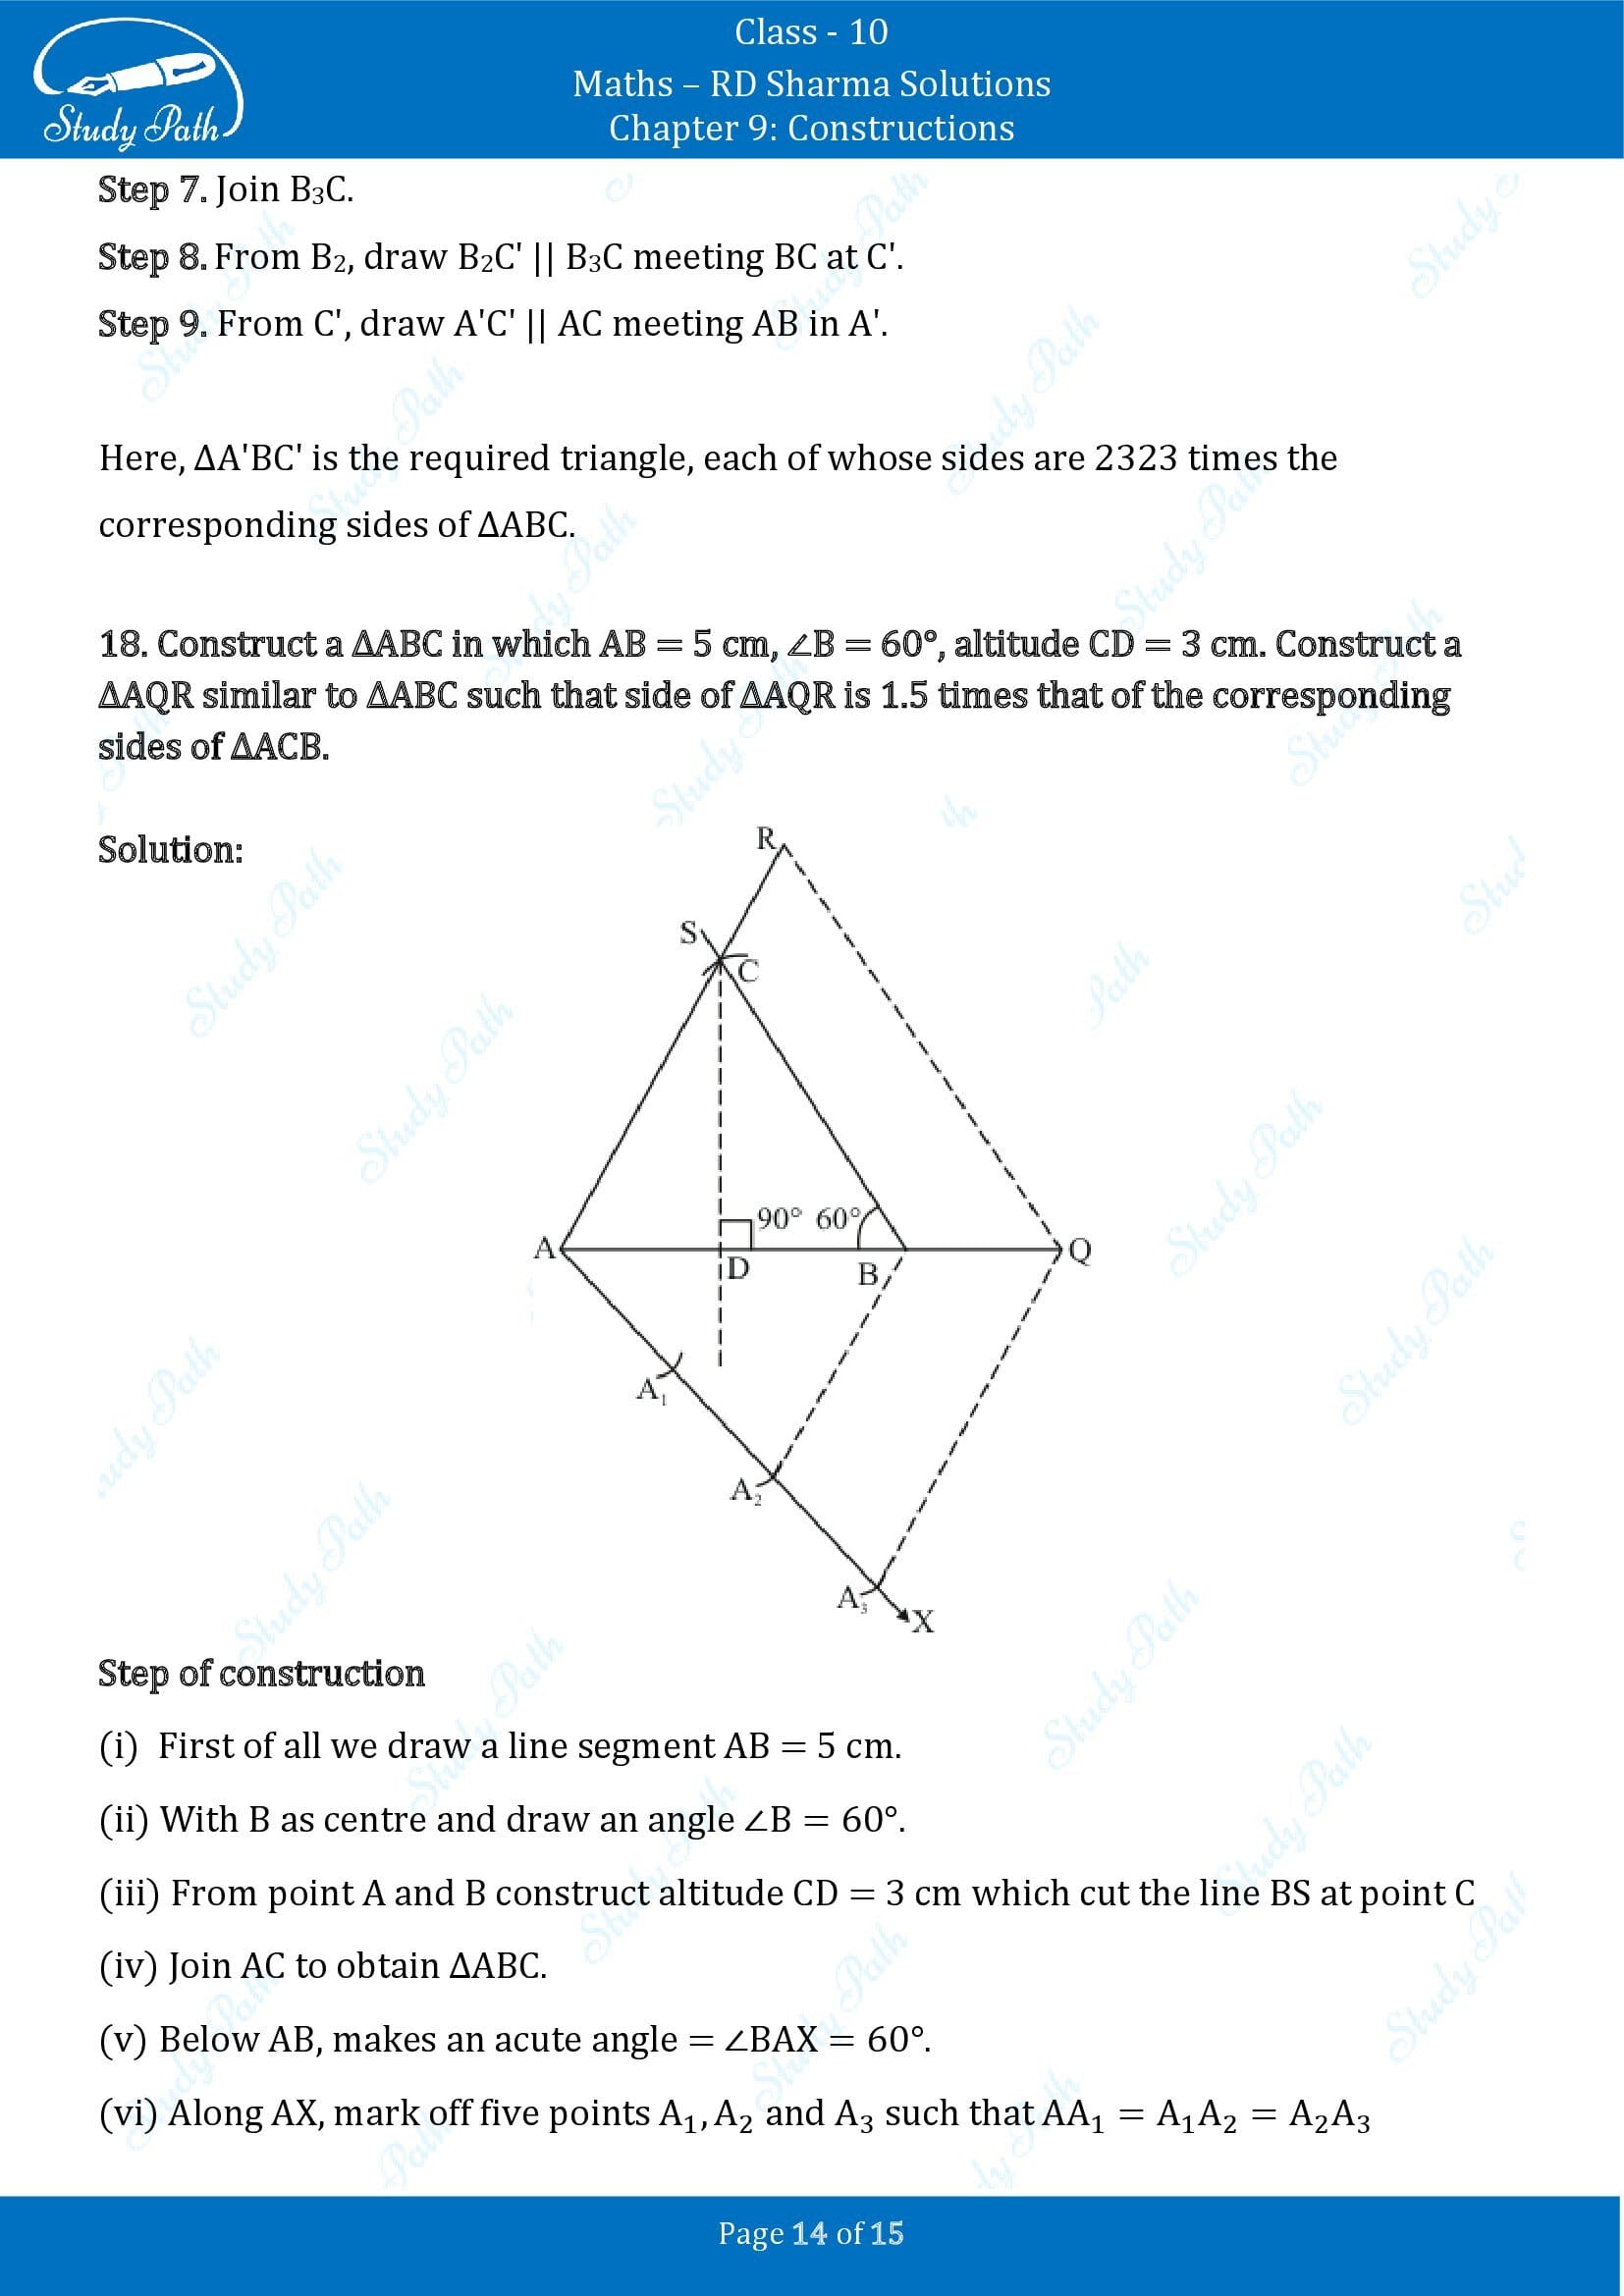 RD Sharma Solutions Class 10 Chapter 9 Constructions Exercise 9.2 00014